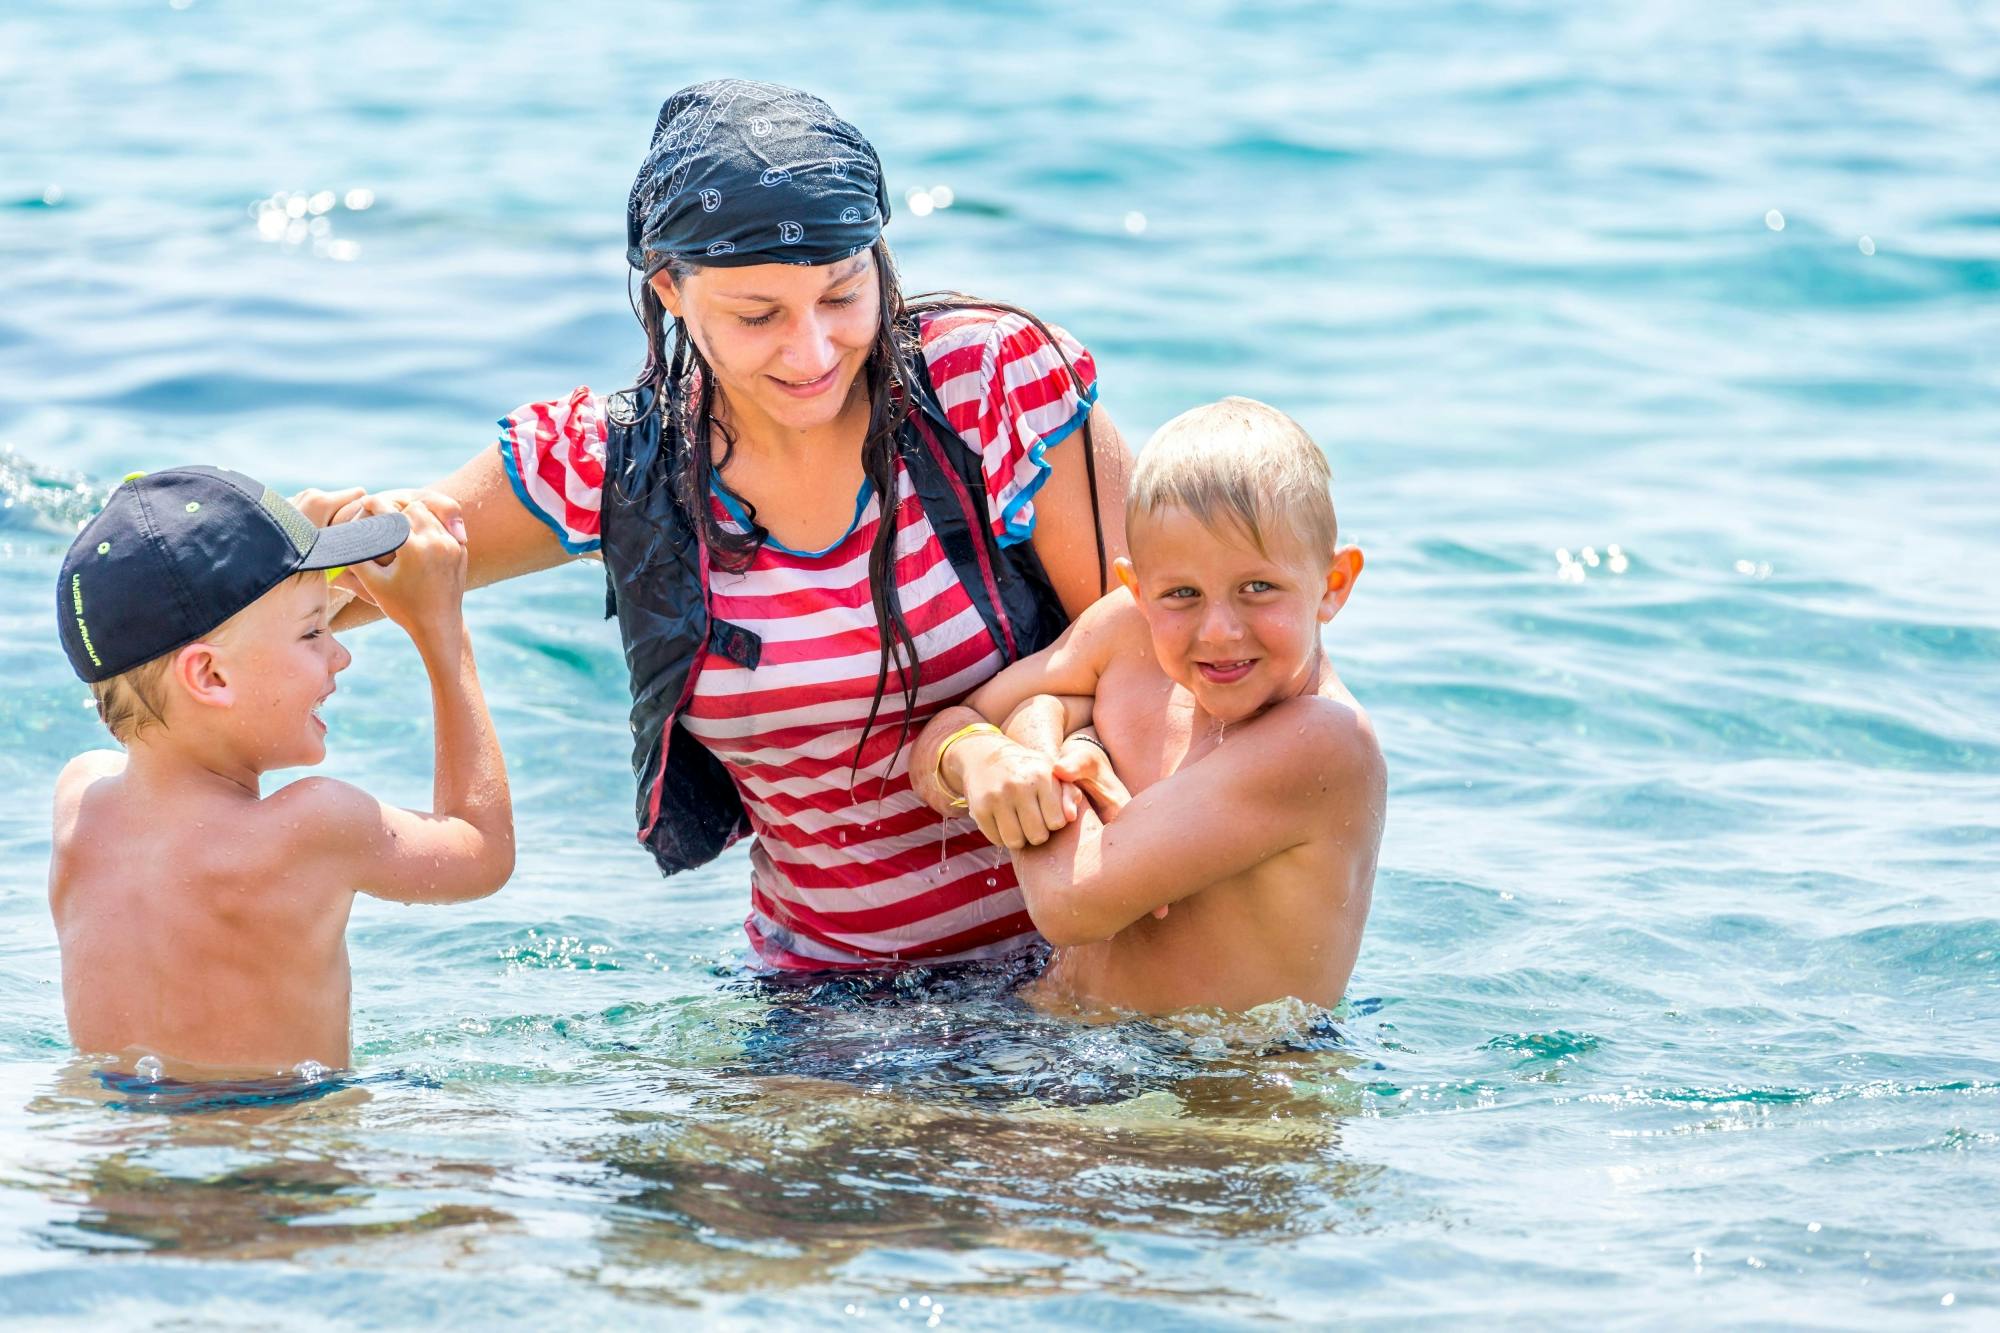 Pirates of Rhodes Family-friendly Themed Cruise